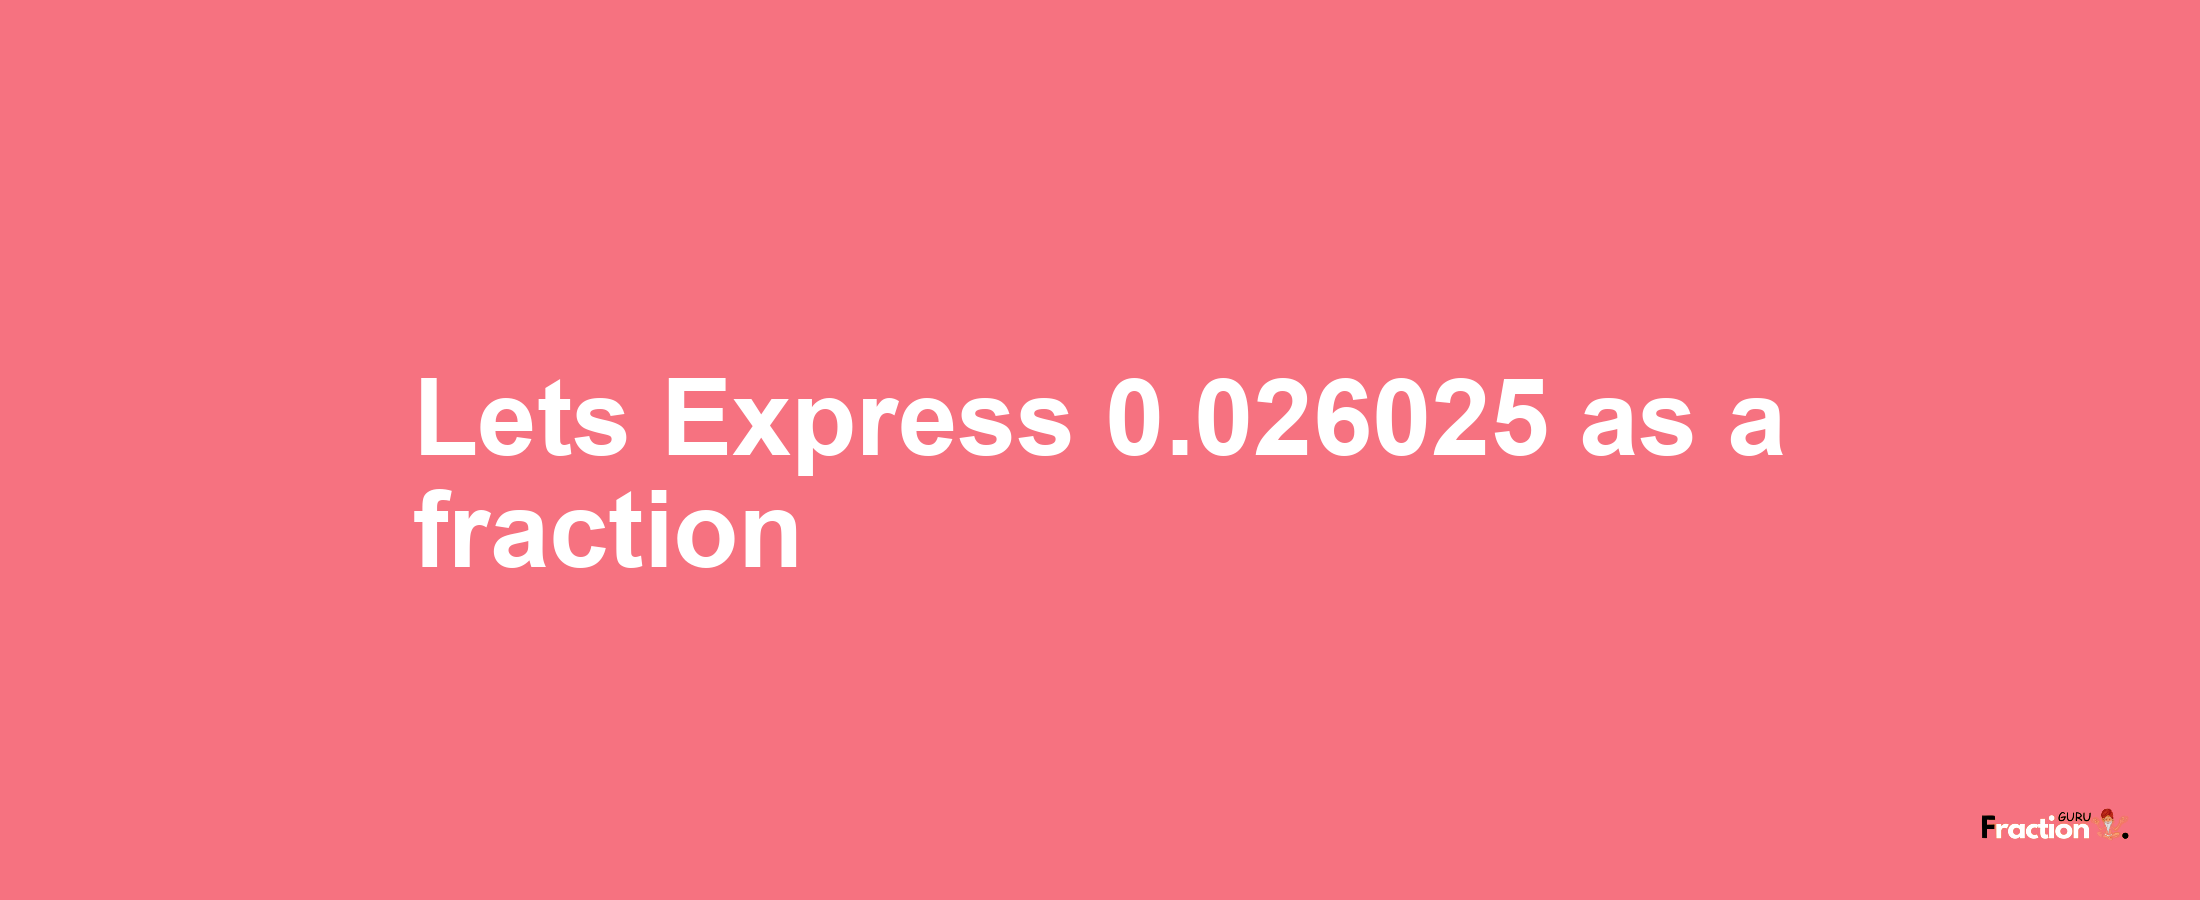 Lets Express 0.026025 as afraction